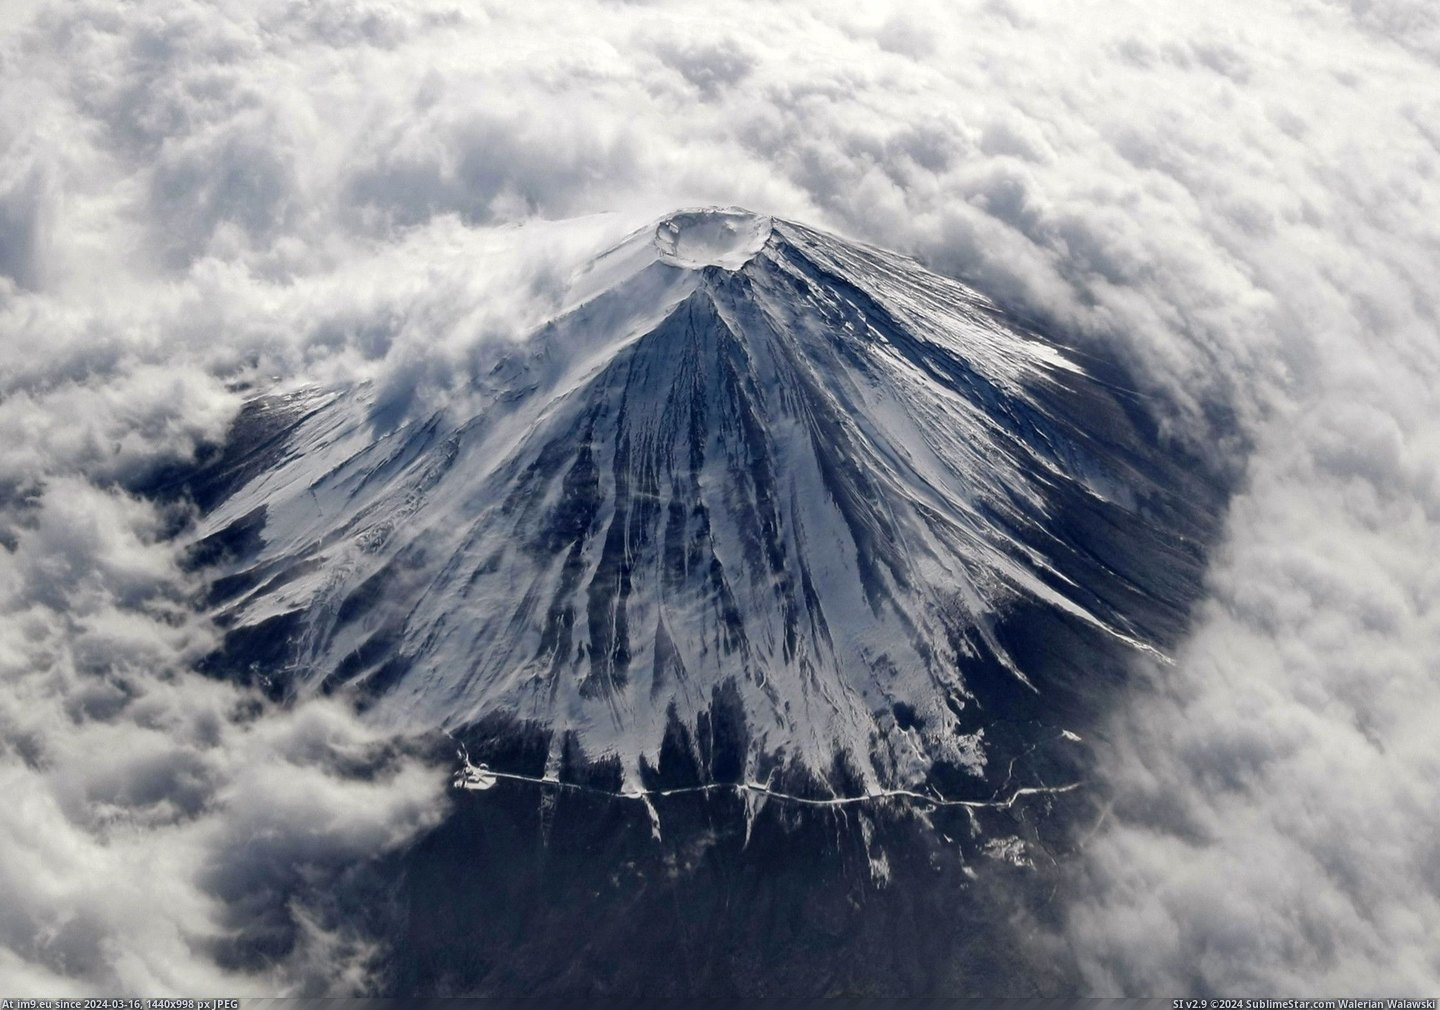 #Mount #Fiji #Aerial [Earthporn] Mount Fiji - Aerial [2200x1537] Pic. (Image of album My r/EARTHPORN favs))